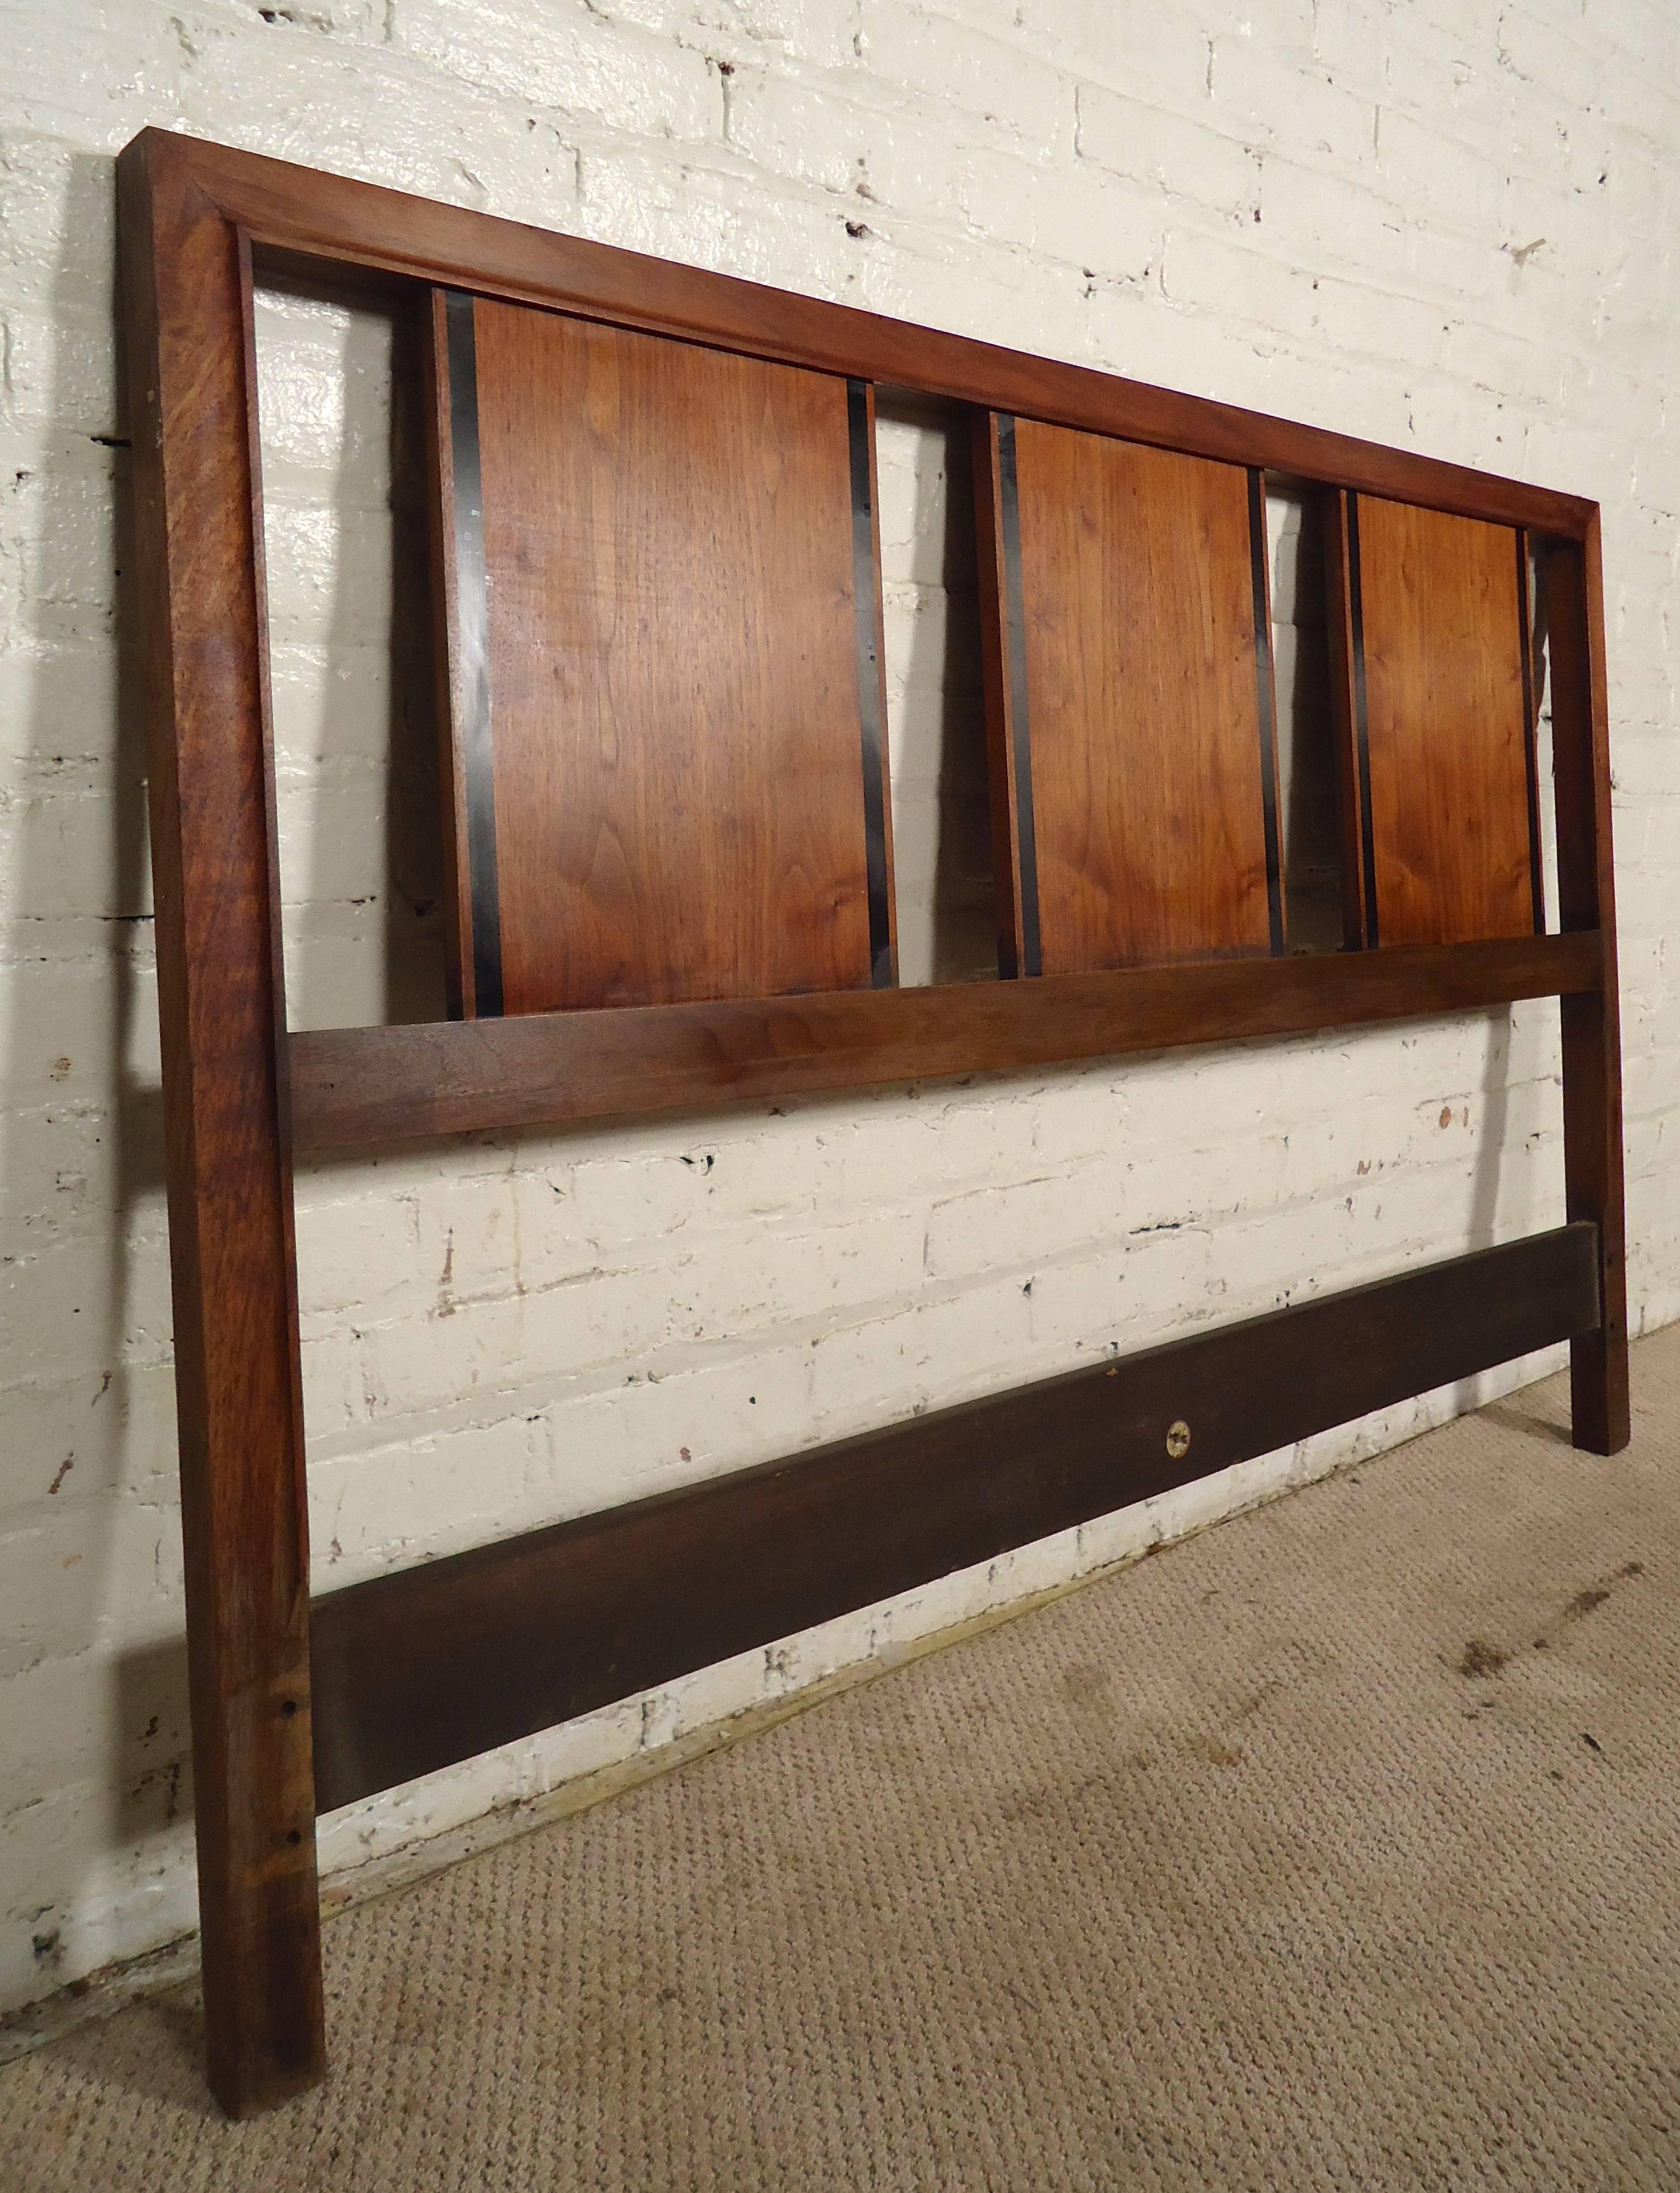 Vintage modern headboard with warm walnut grain and handsome black trimming. 

(Please confirm item location - NY or NJ - with dealer)